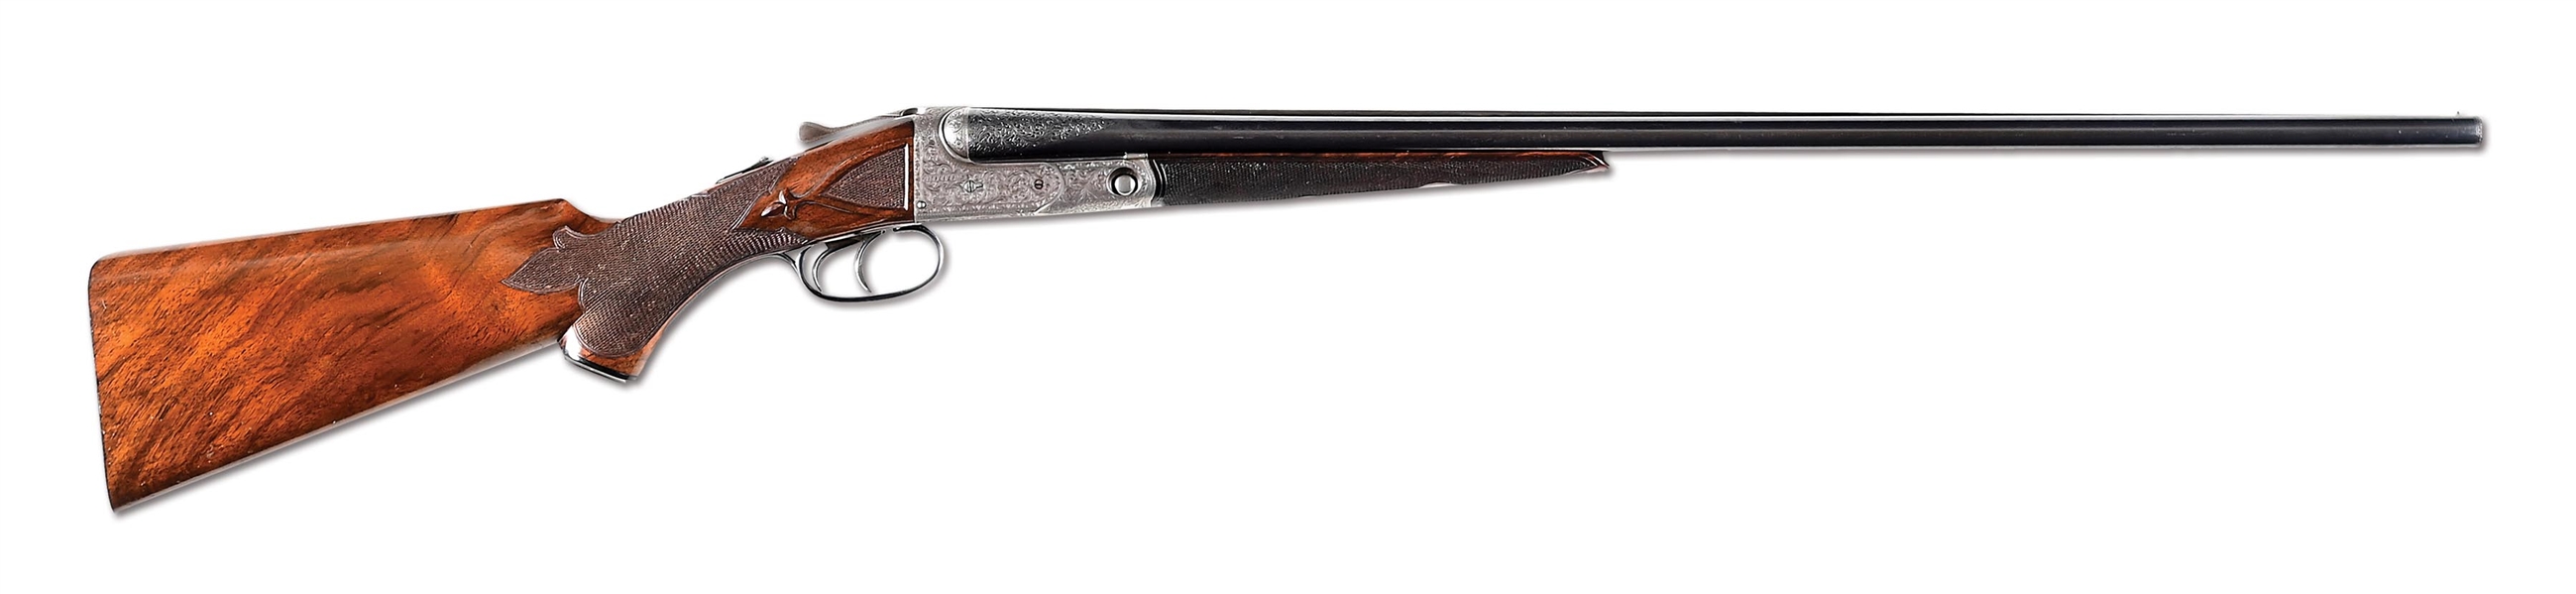 (C) AN OUTSTANDING, EXTREMELY SCARCE PARKER BROTHERS AAHE 28 BORE SIDE BY SIDE SHOTGUN WITH 26" BARRELS.